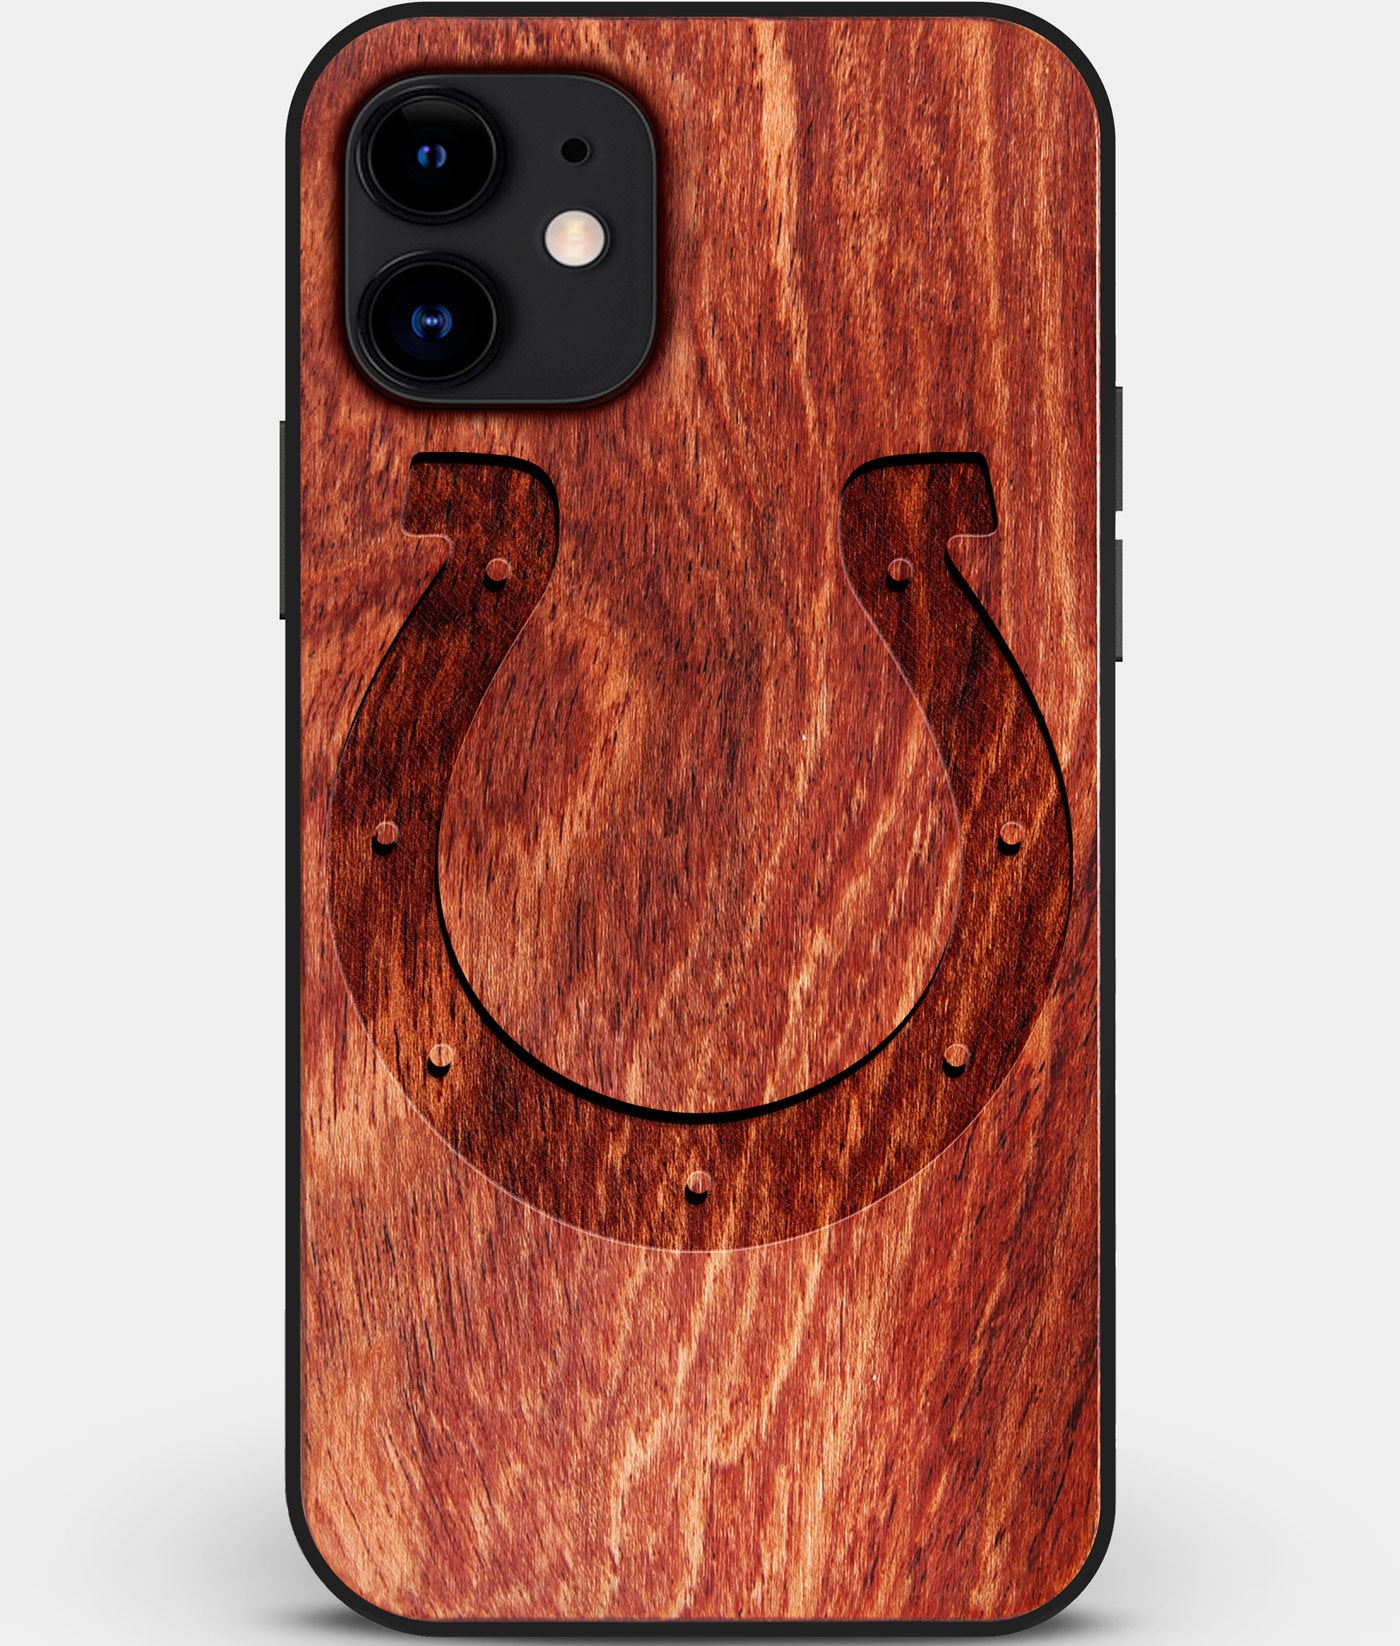 Custom Carved Wood Indianapolis Colts iPhone 12 Case | Personalized Mahogany Wood Indianapolis Colts Cover, Birthday Gift, Gifts For Him, Monogrammed Gift For Fan | by Engraved In Nature